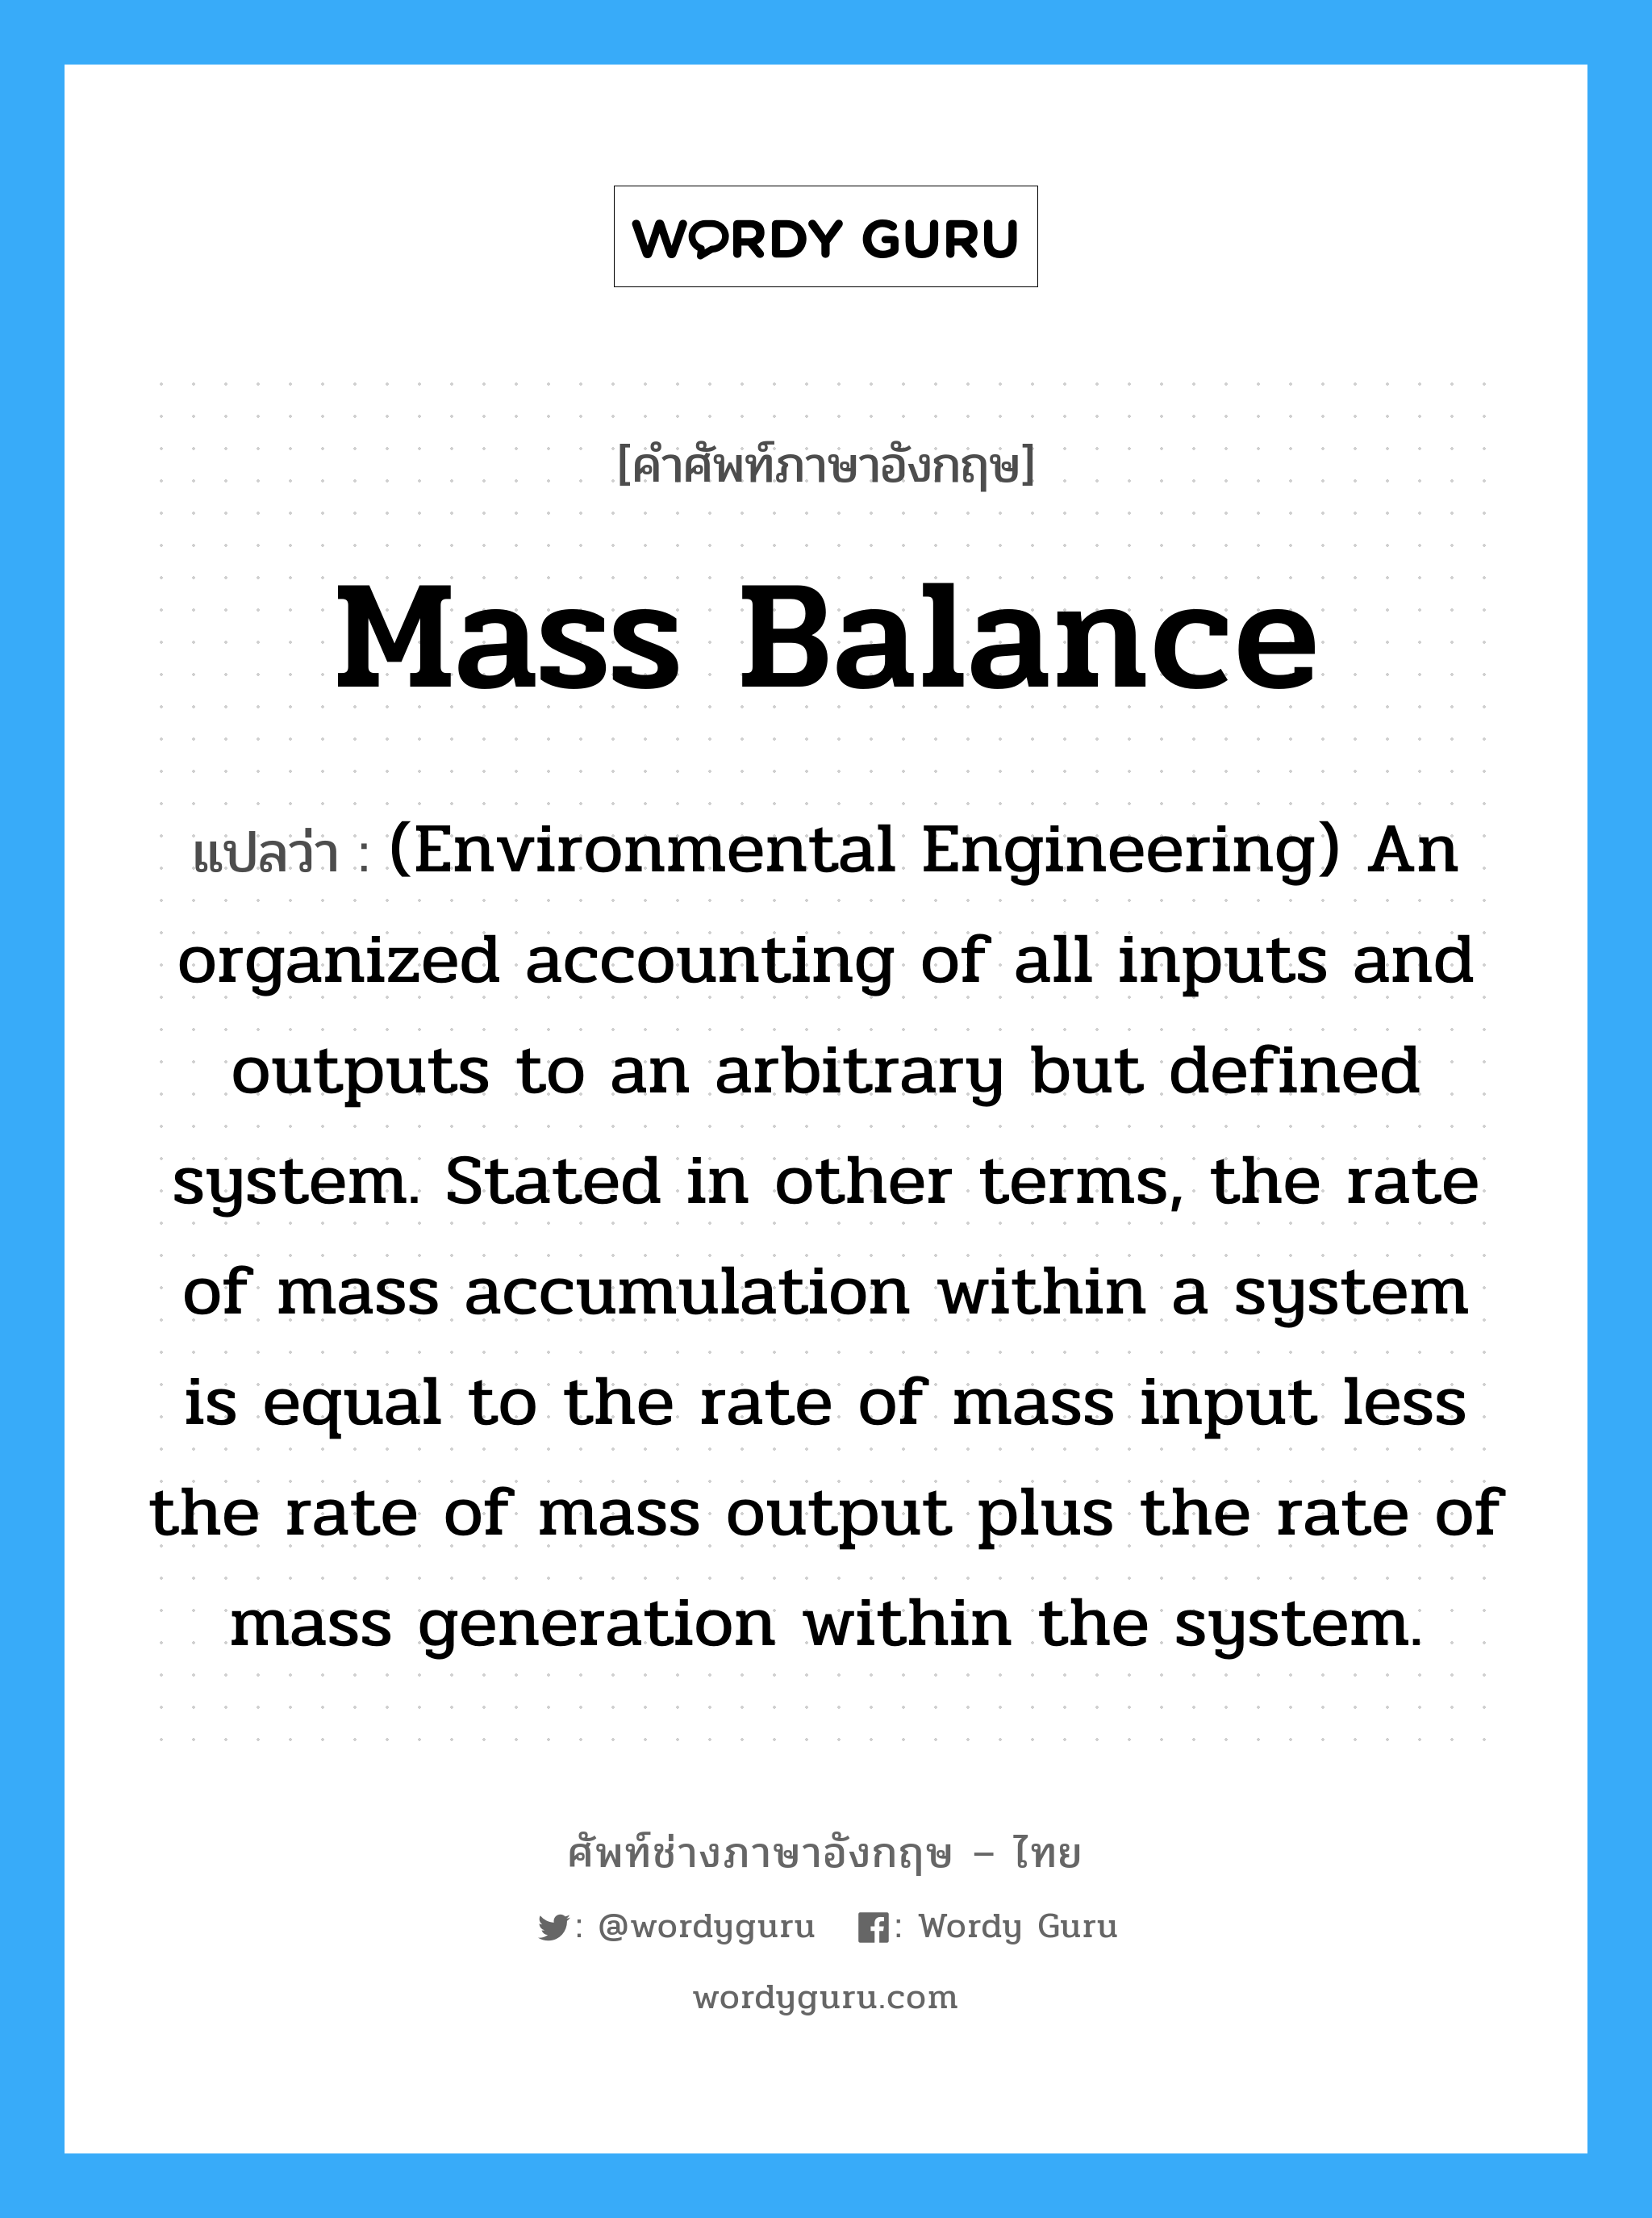 (Environmental Engineering) An organized accounting of all inputs and outputs to an arbitrary but defined system. Stated in other terms, the rate of mass accumulation within a system is equal to the rate of mass input less the rate of mass output plus the rate of mass generation within the system. ภาษาอังกฤษ?, คำศัพท์ช่างภาษาอังกฤษ - ไทย (Environmental Engineering) An organized accounting of all inputs and outputs to an arbitrary but defined system. Stated in other terms, the rate of mass accumulation within a system is equal to the rate of mass input less the rate of mass output plus the rate of mass generation within the system. คำศัพท์ภาษาอังกฤษ (Environmental Engineering) An organized accounting of all inputs and outputs to an arbitrary but defined system. Stated in other terms, the rate of mass accumulation within a system is equal to the rate of mass input less the rate of mass output plus the rate of mass generation within the system. แปลว่า Mass balance